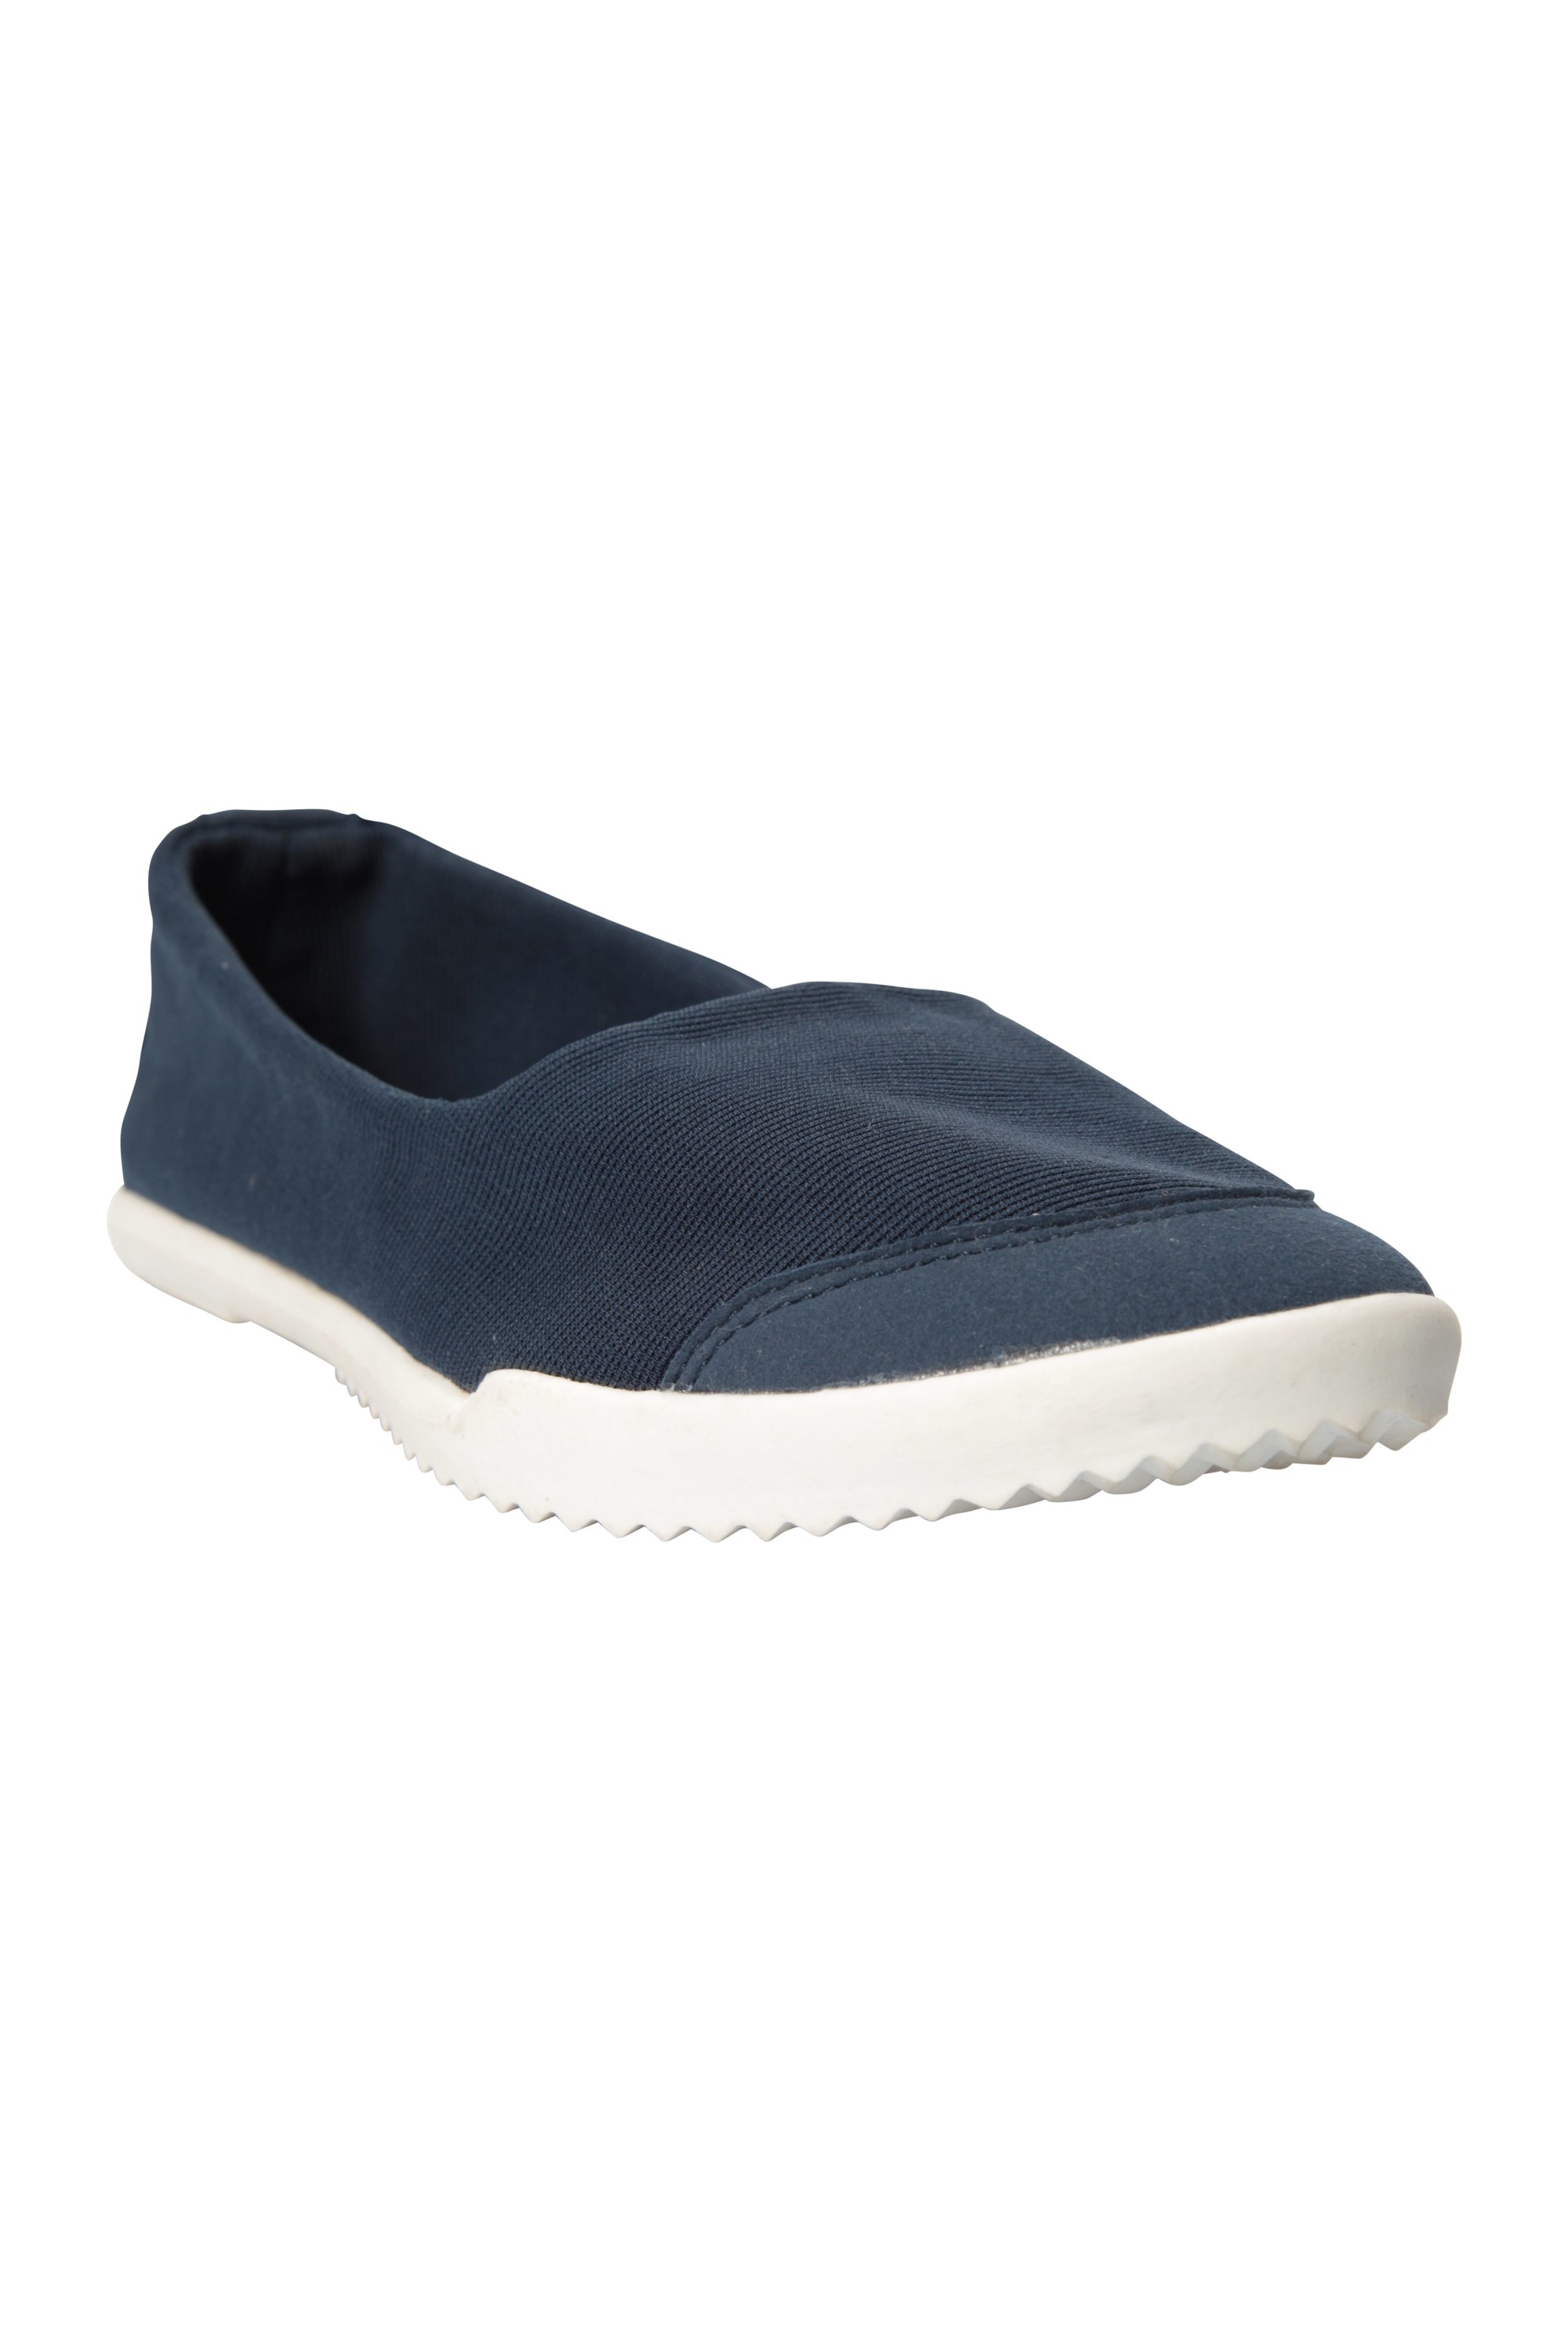 BOWNESS CASUAL WOMENS SHOE